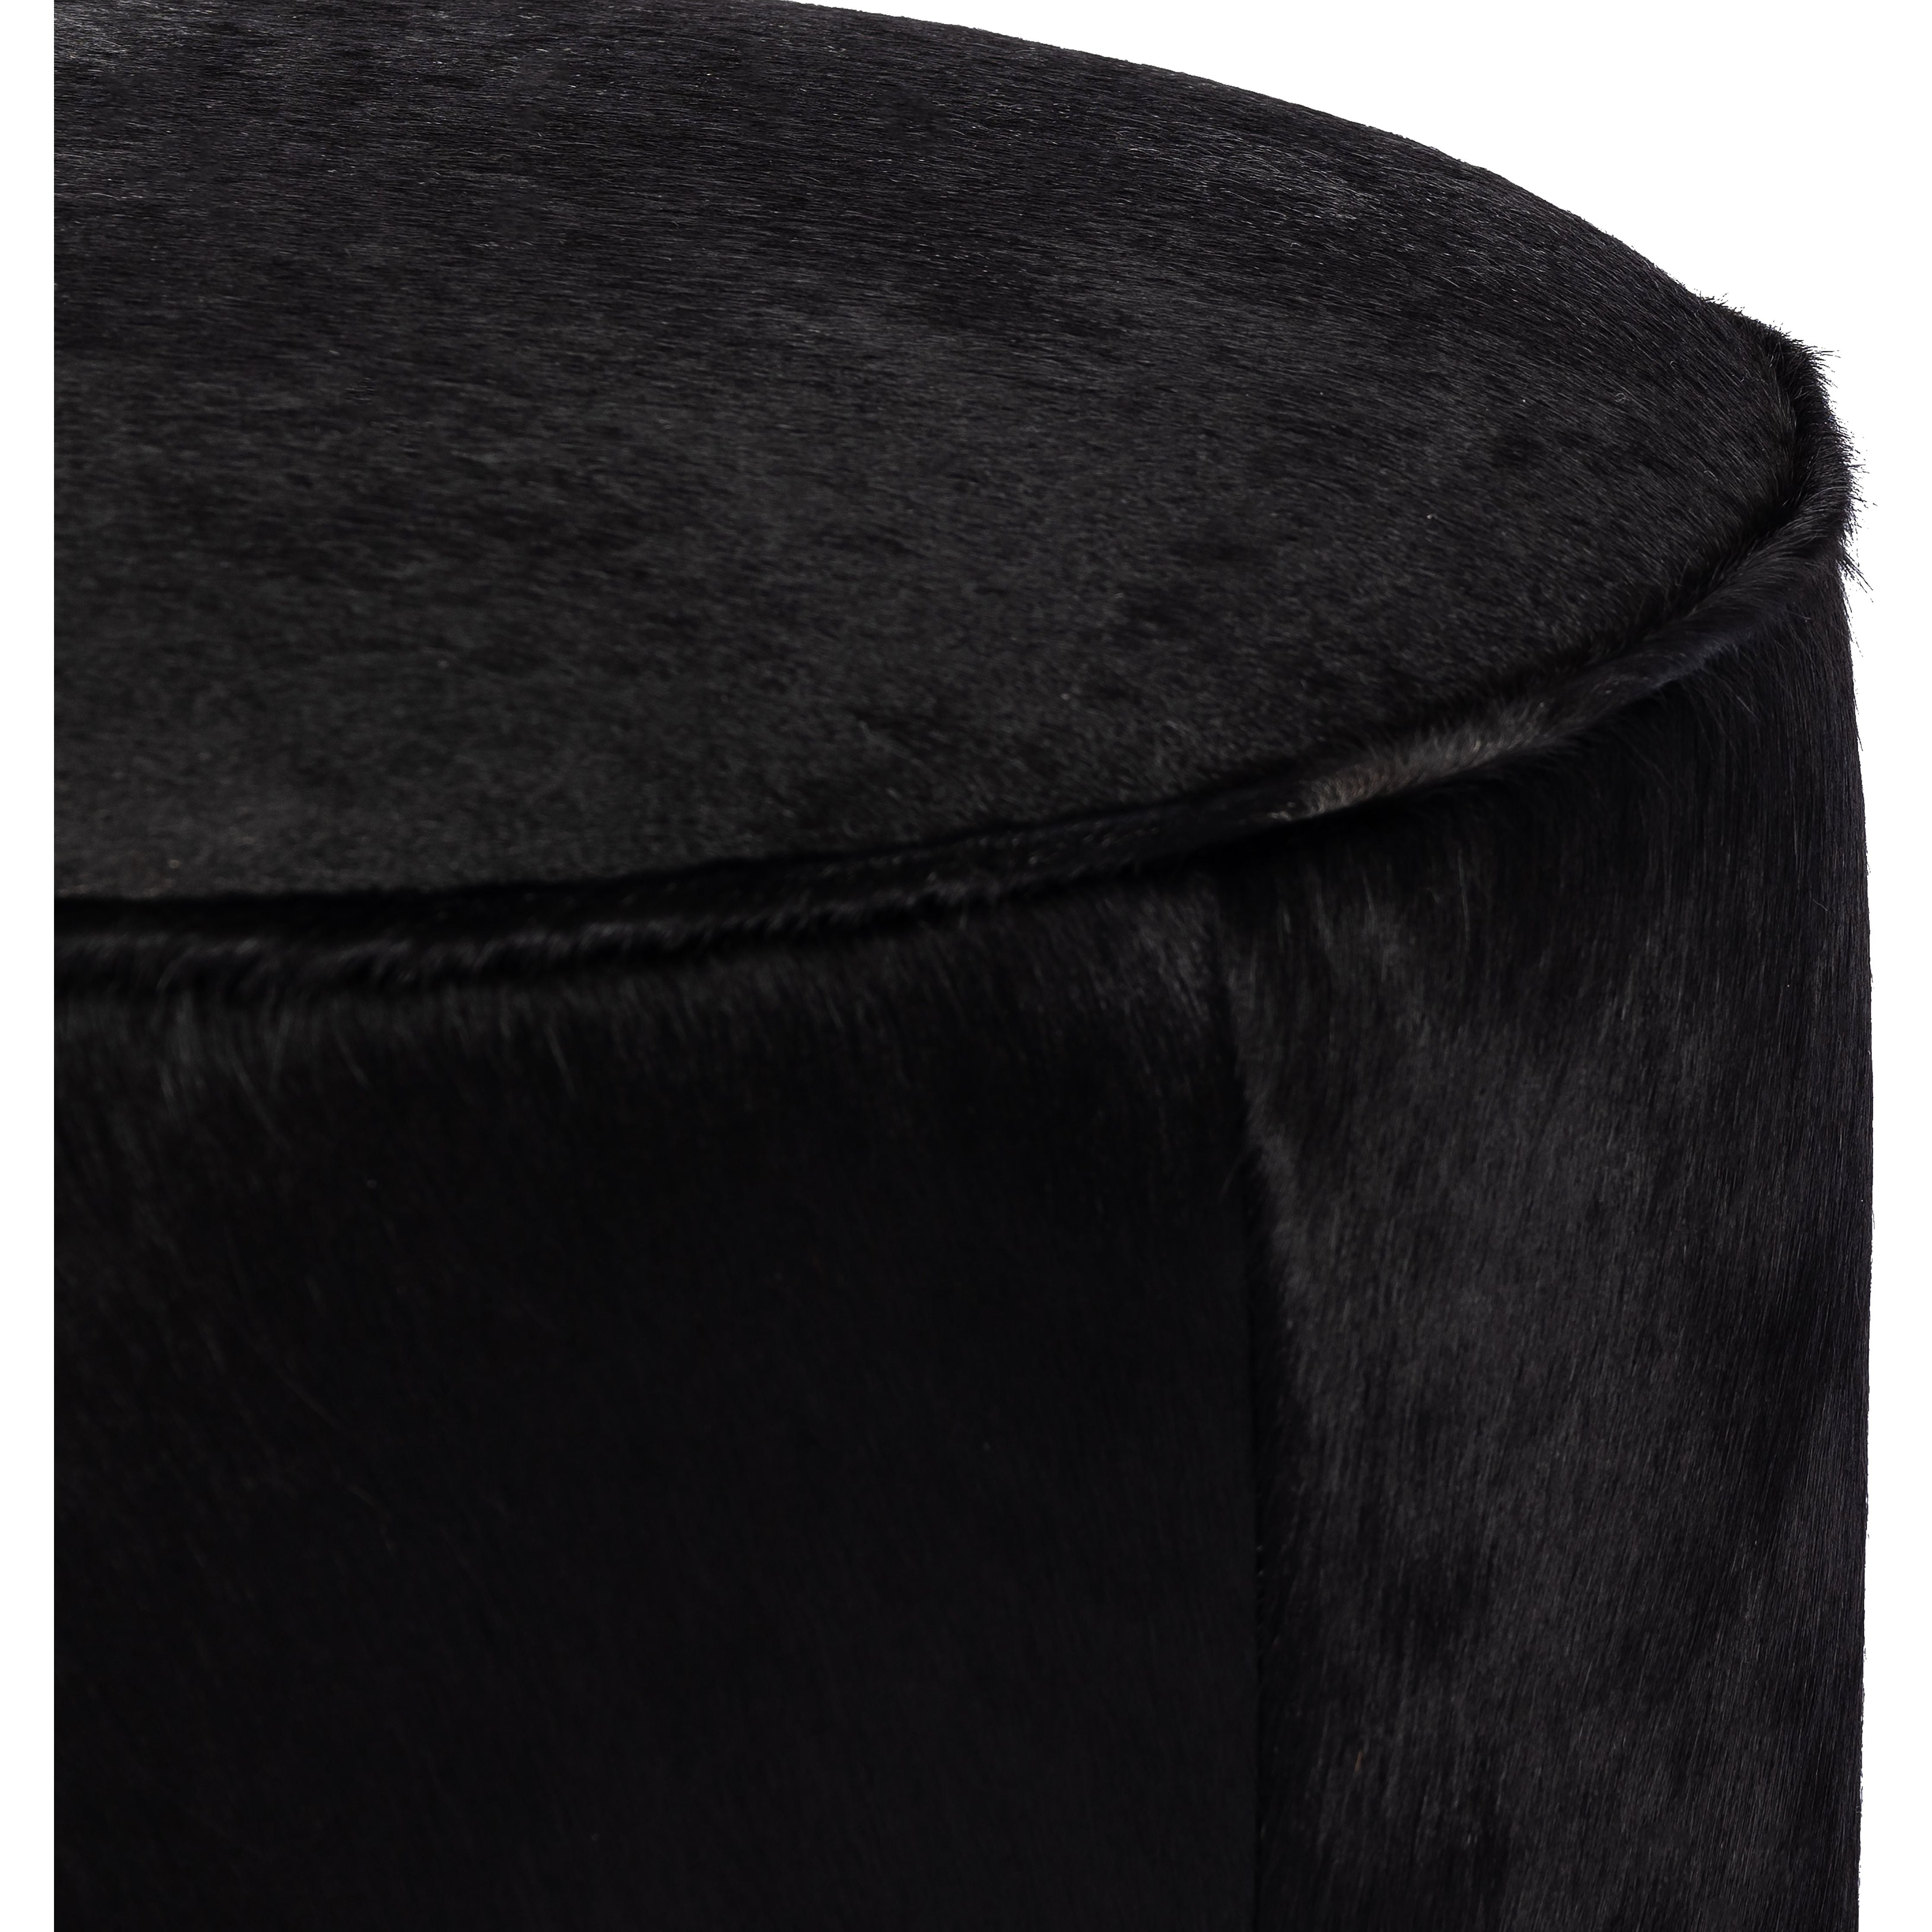 This round ottoman can be placed just about anywhere, bringing with it a hip retro vibe. Covered in soft and luminous black hair-on hide, which is naturally warm and textural with authentic highlights. Amethyst Home provides interior design, new construction, custom furniture, and area rugs in the Omaha metro area.